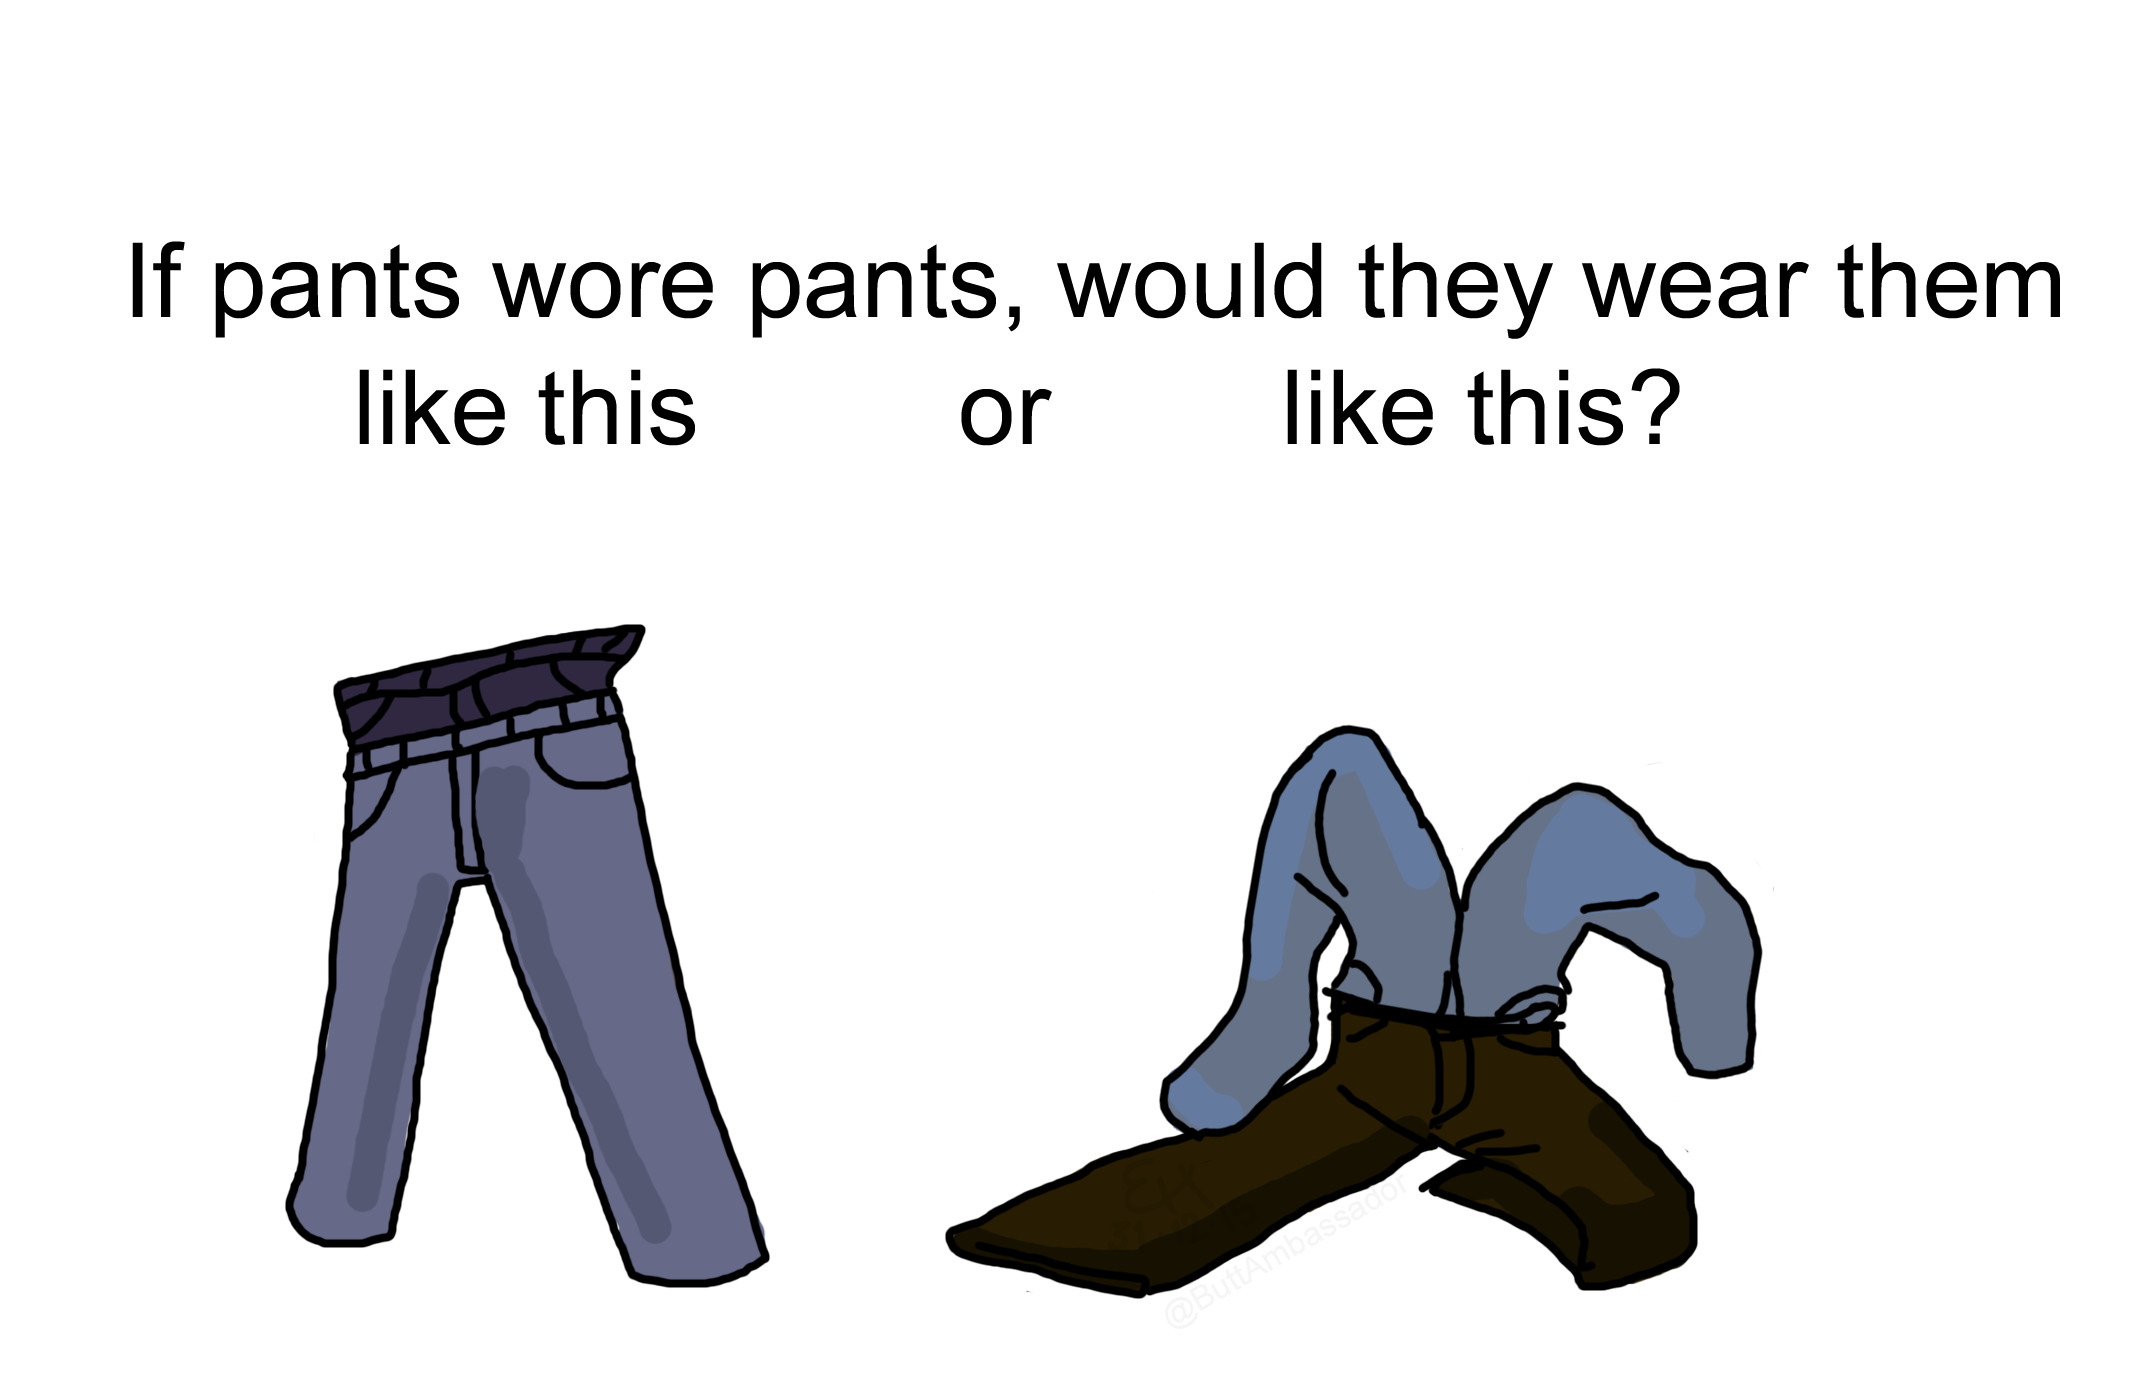 if x wore pants meme - If pants wore pants, would they wear them this or th...